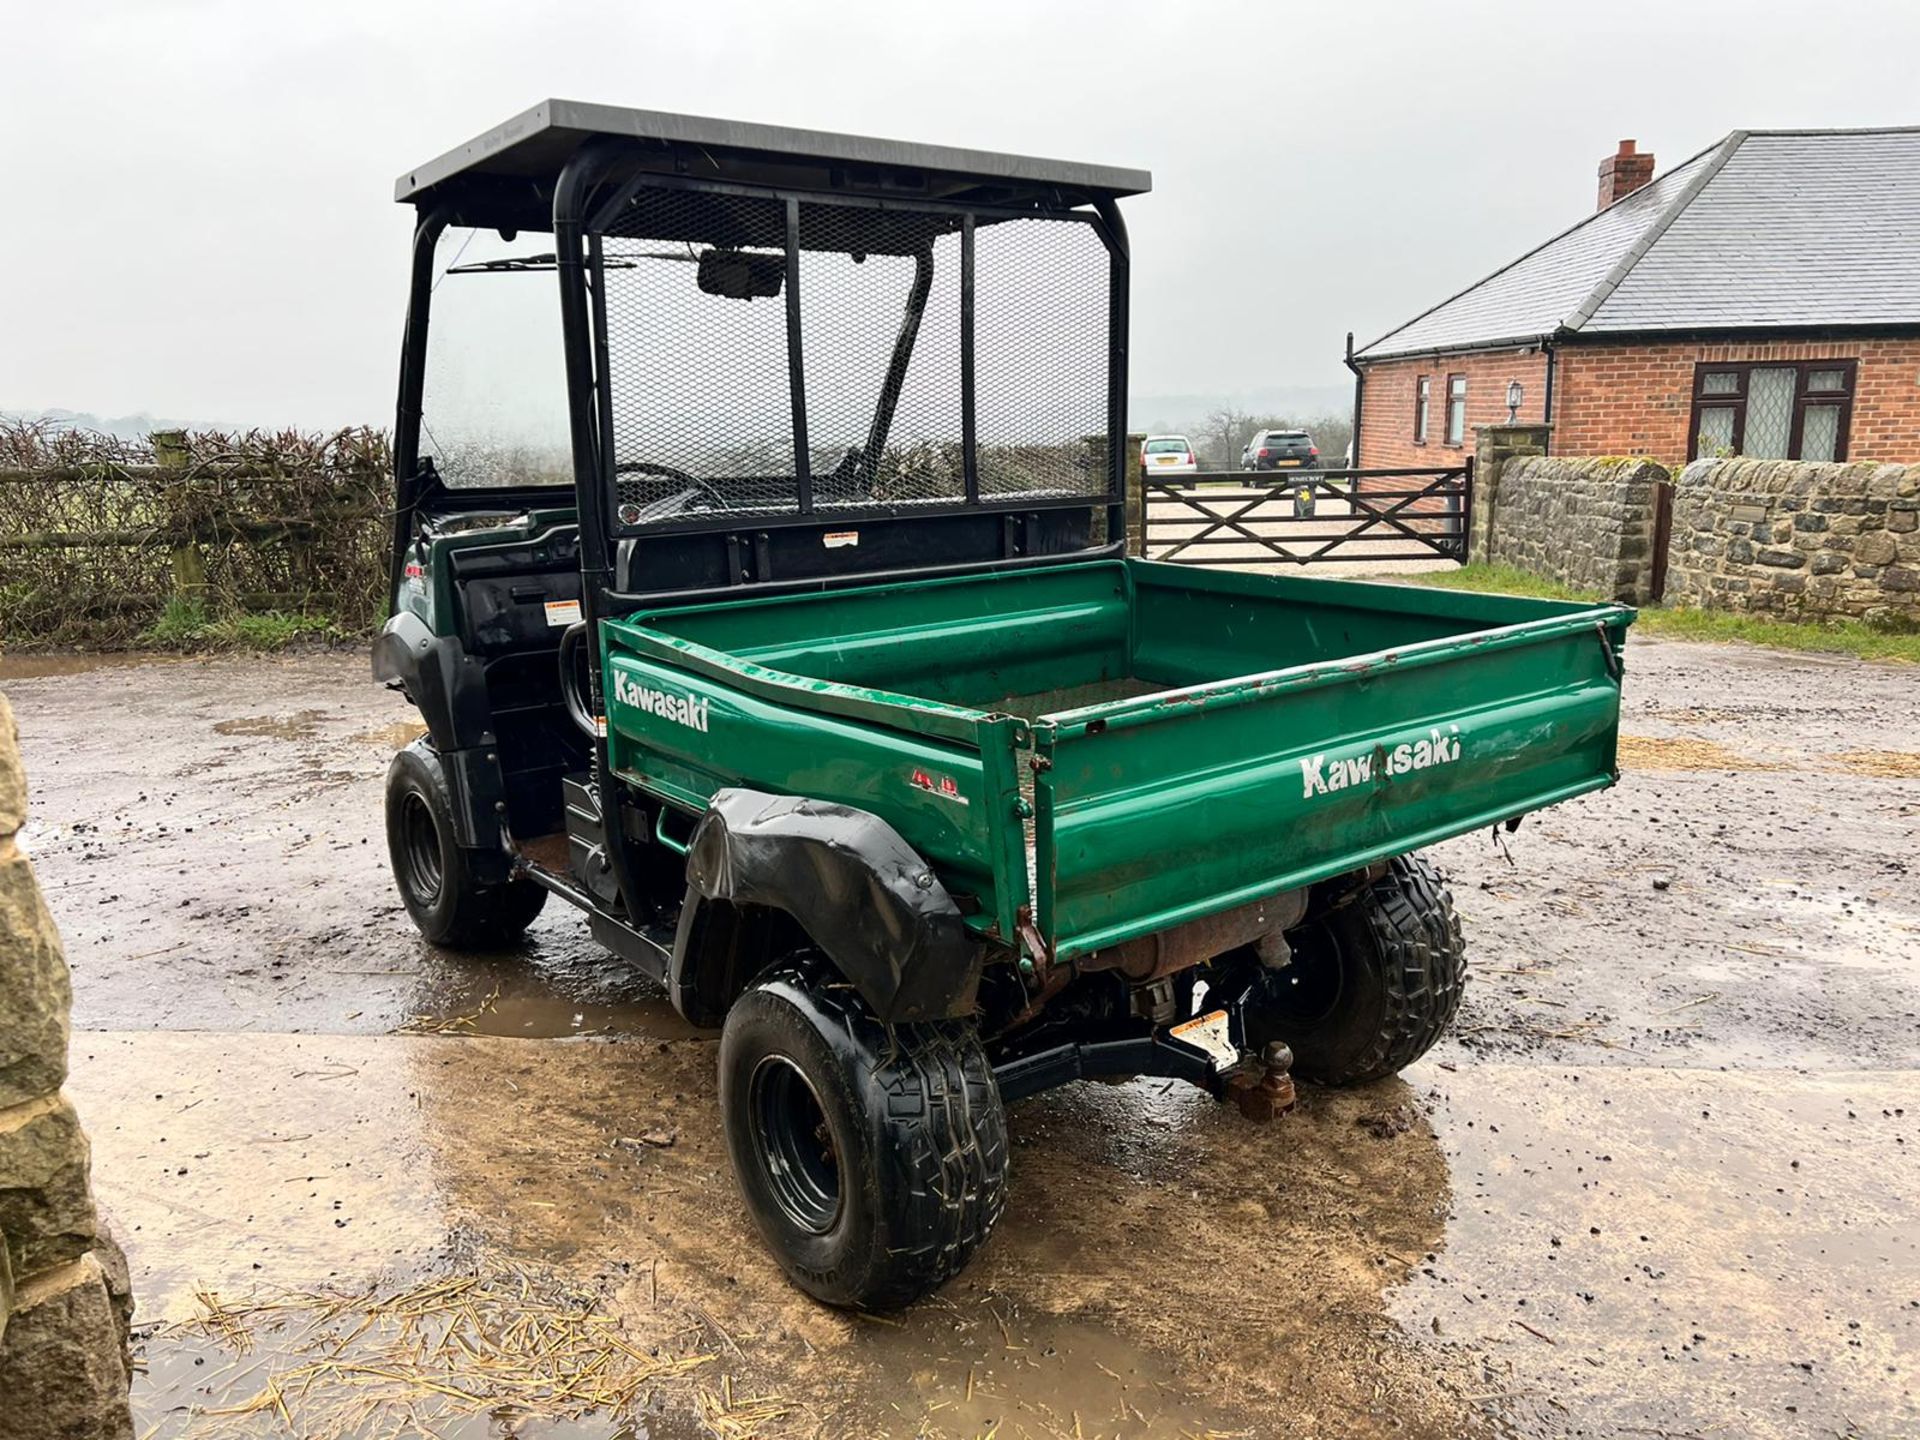 2009 Kawasaki Mule 4010 Buggy, Runs And Drives, Showing A Low 2425 Hours! *PLUS VAT* - Image 4 of 11